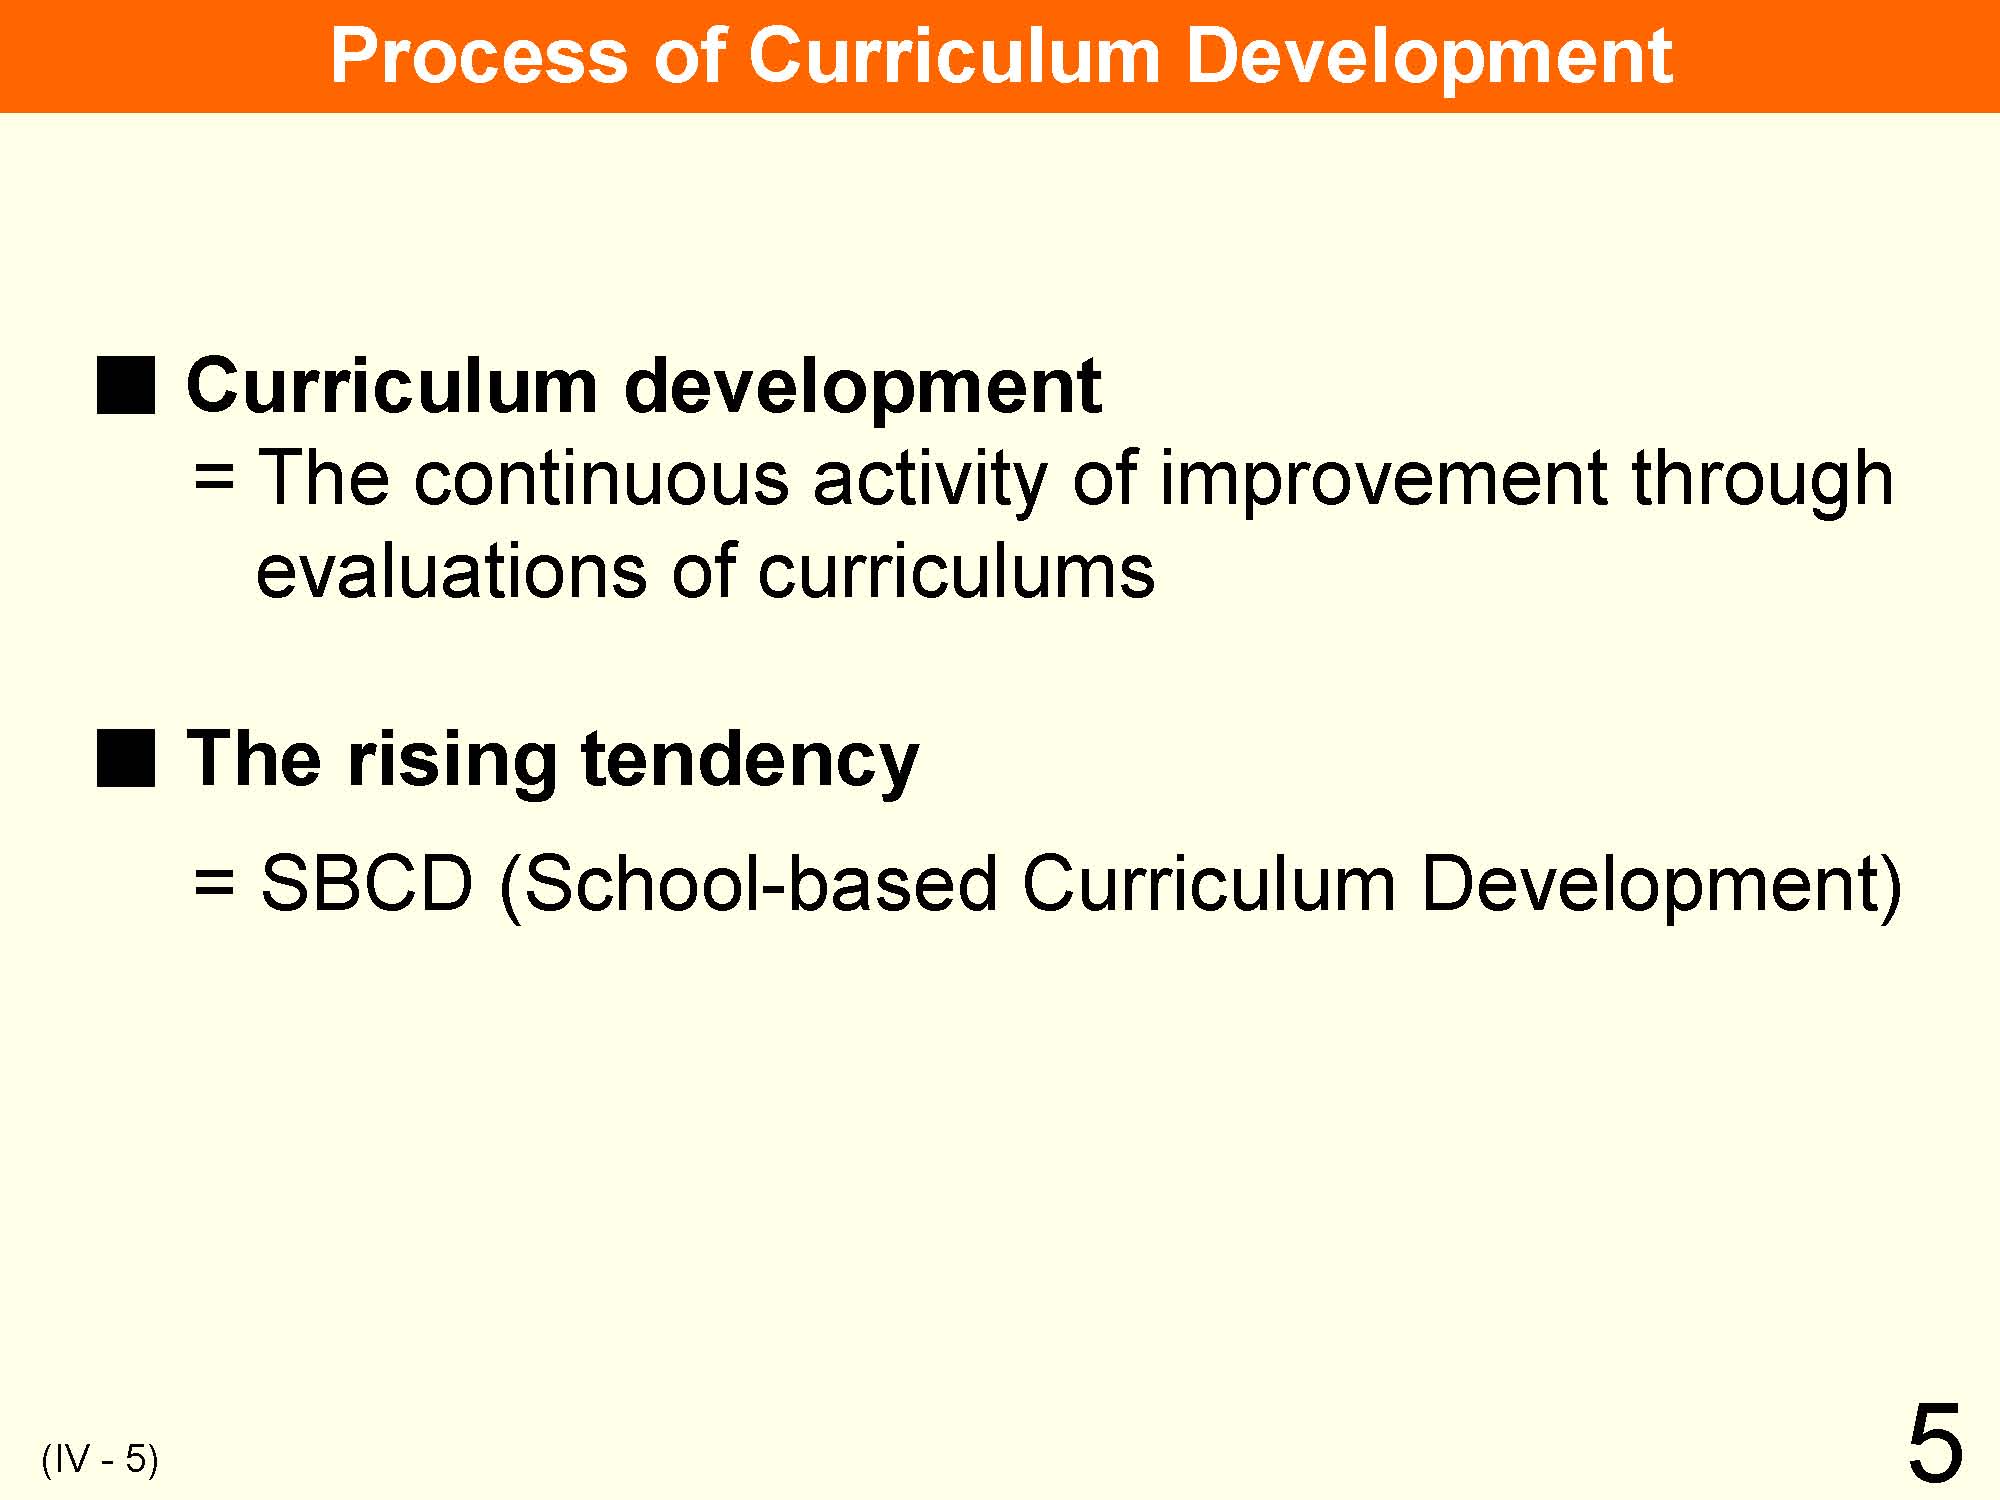 IV Organization and Implementation of Curriculum